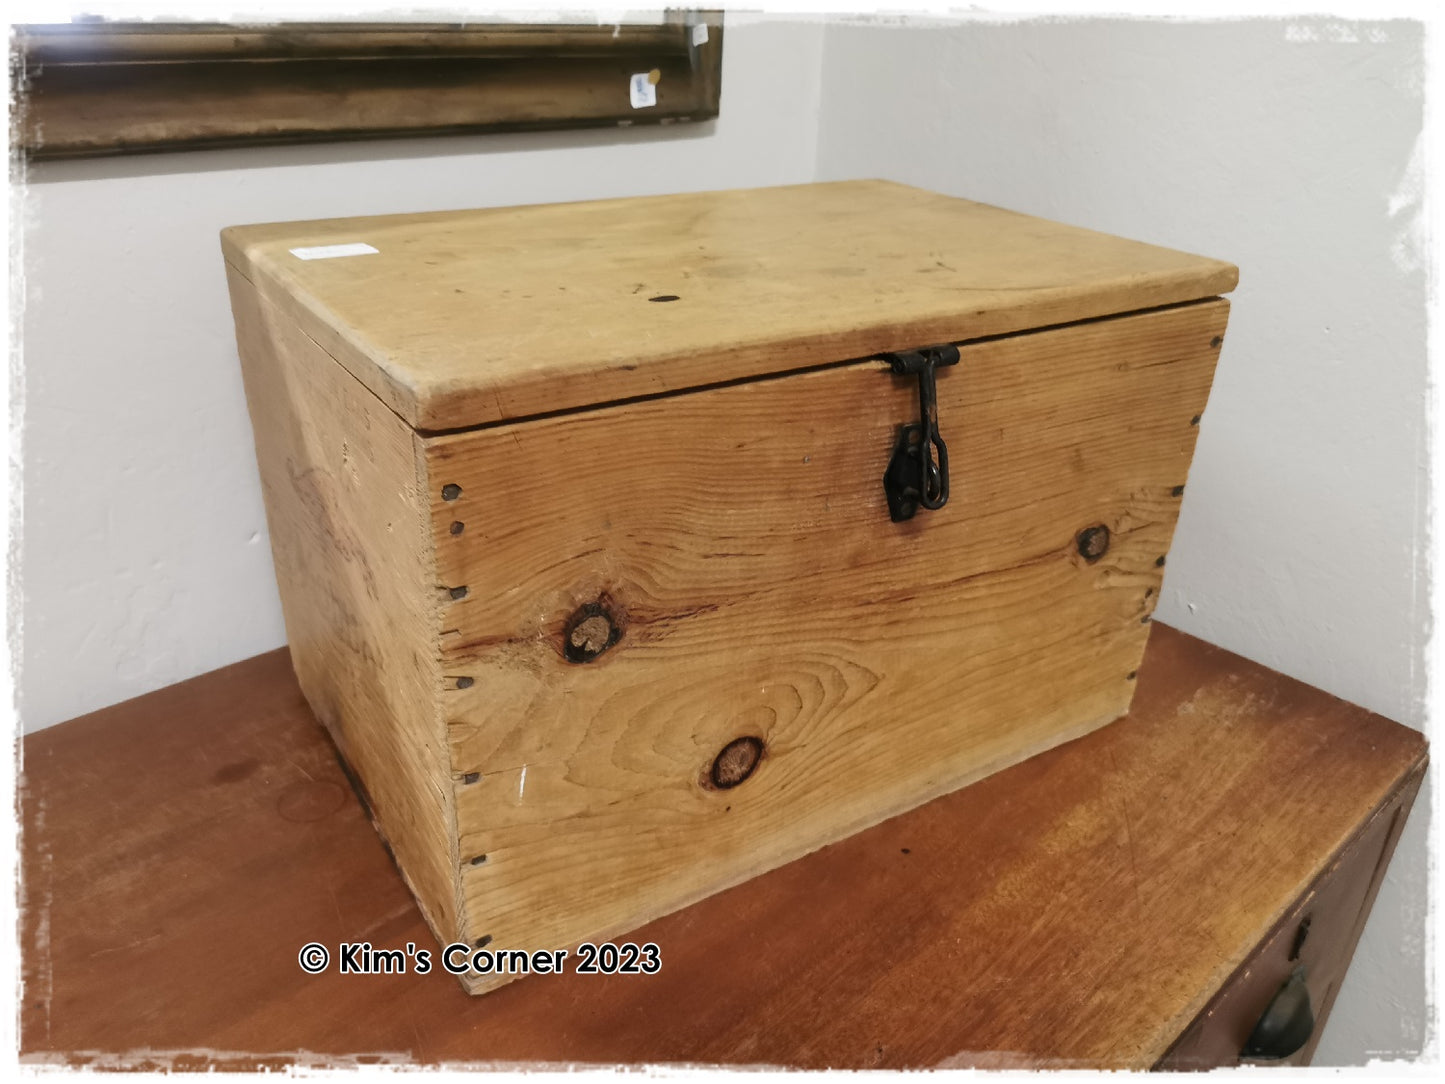 Wooden Box with lid